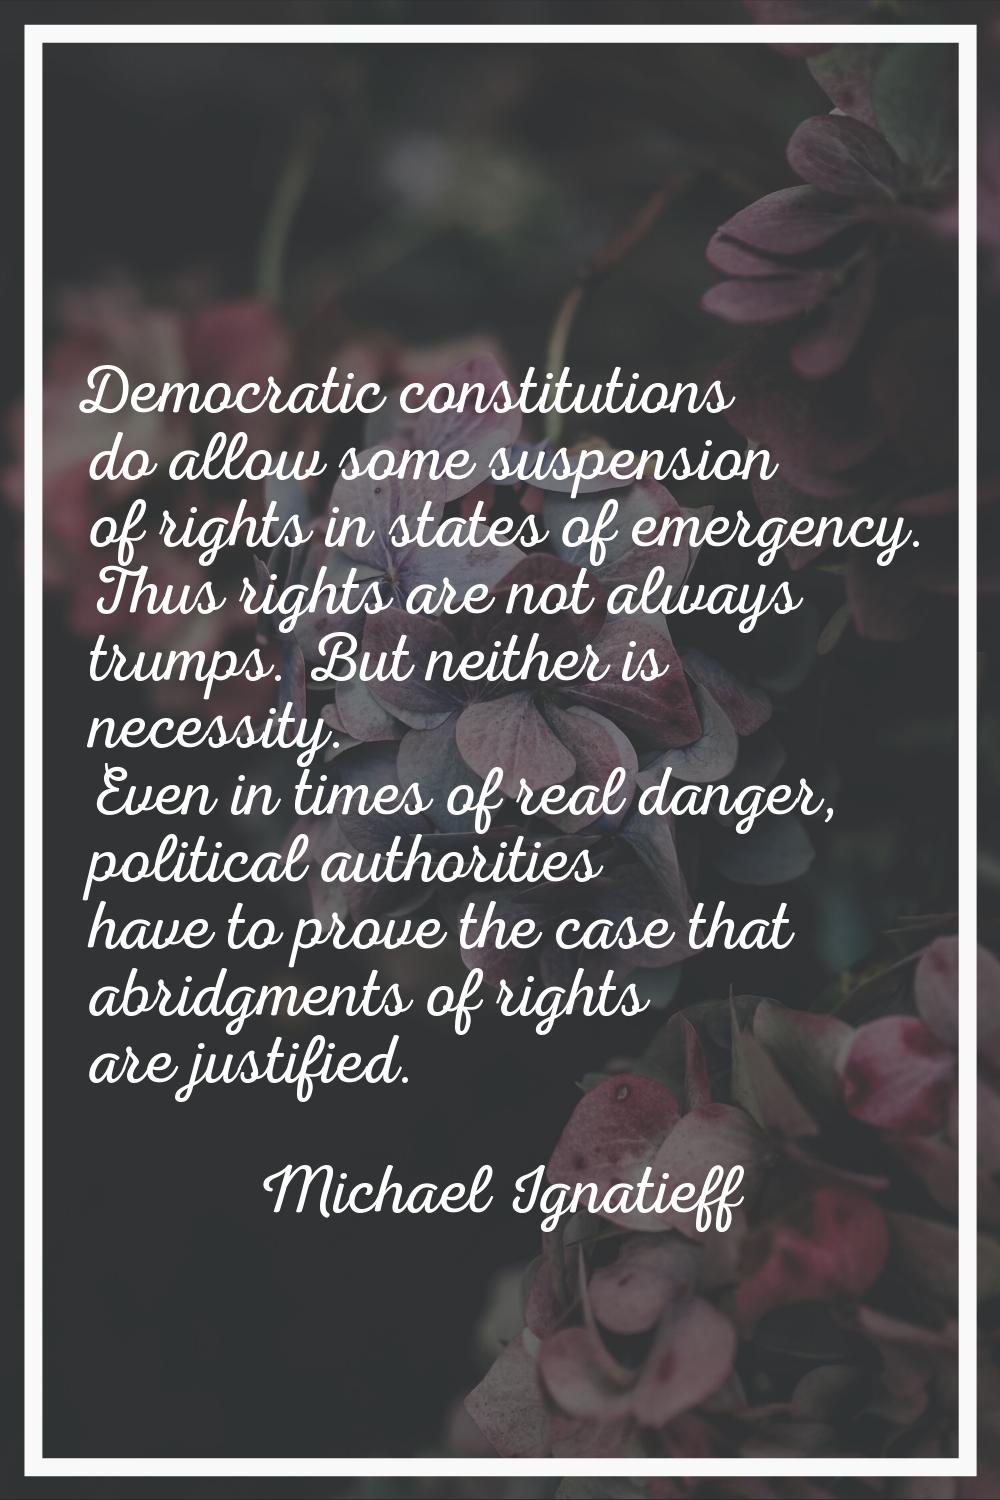 Democratic constitutions do allow some suspension of rights in states of emergency. Thus rights are